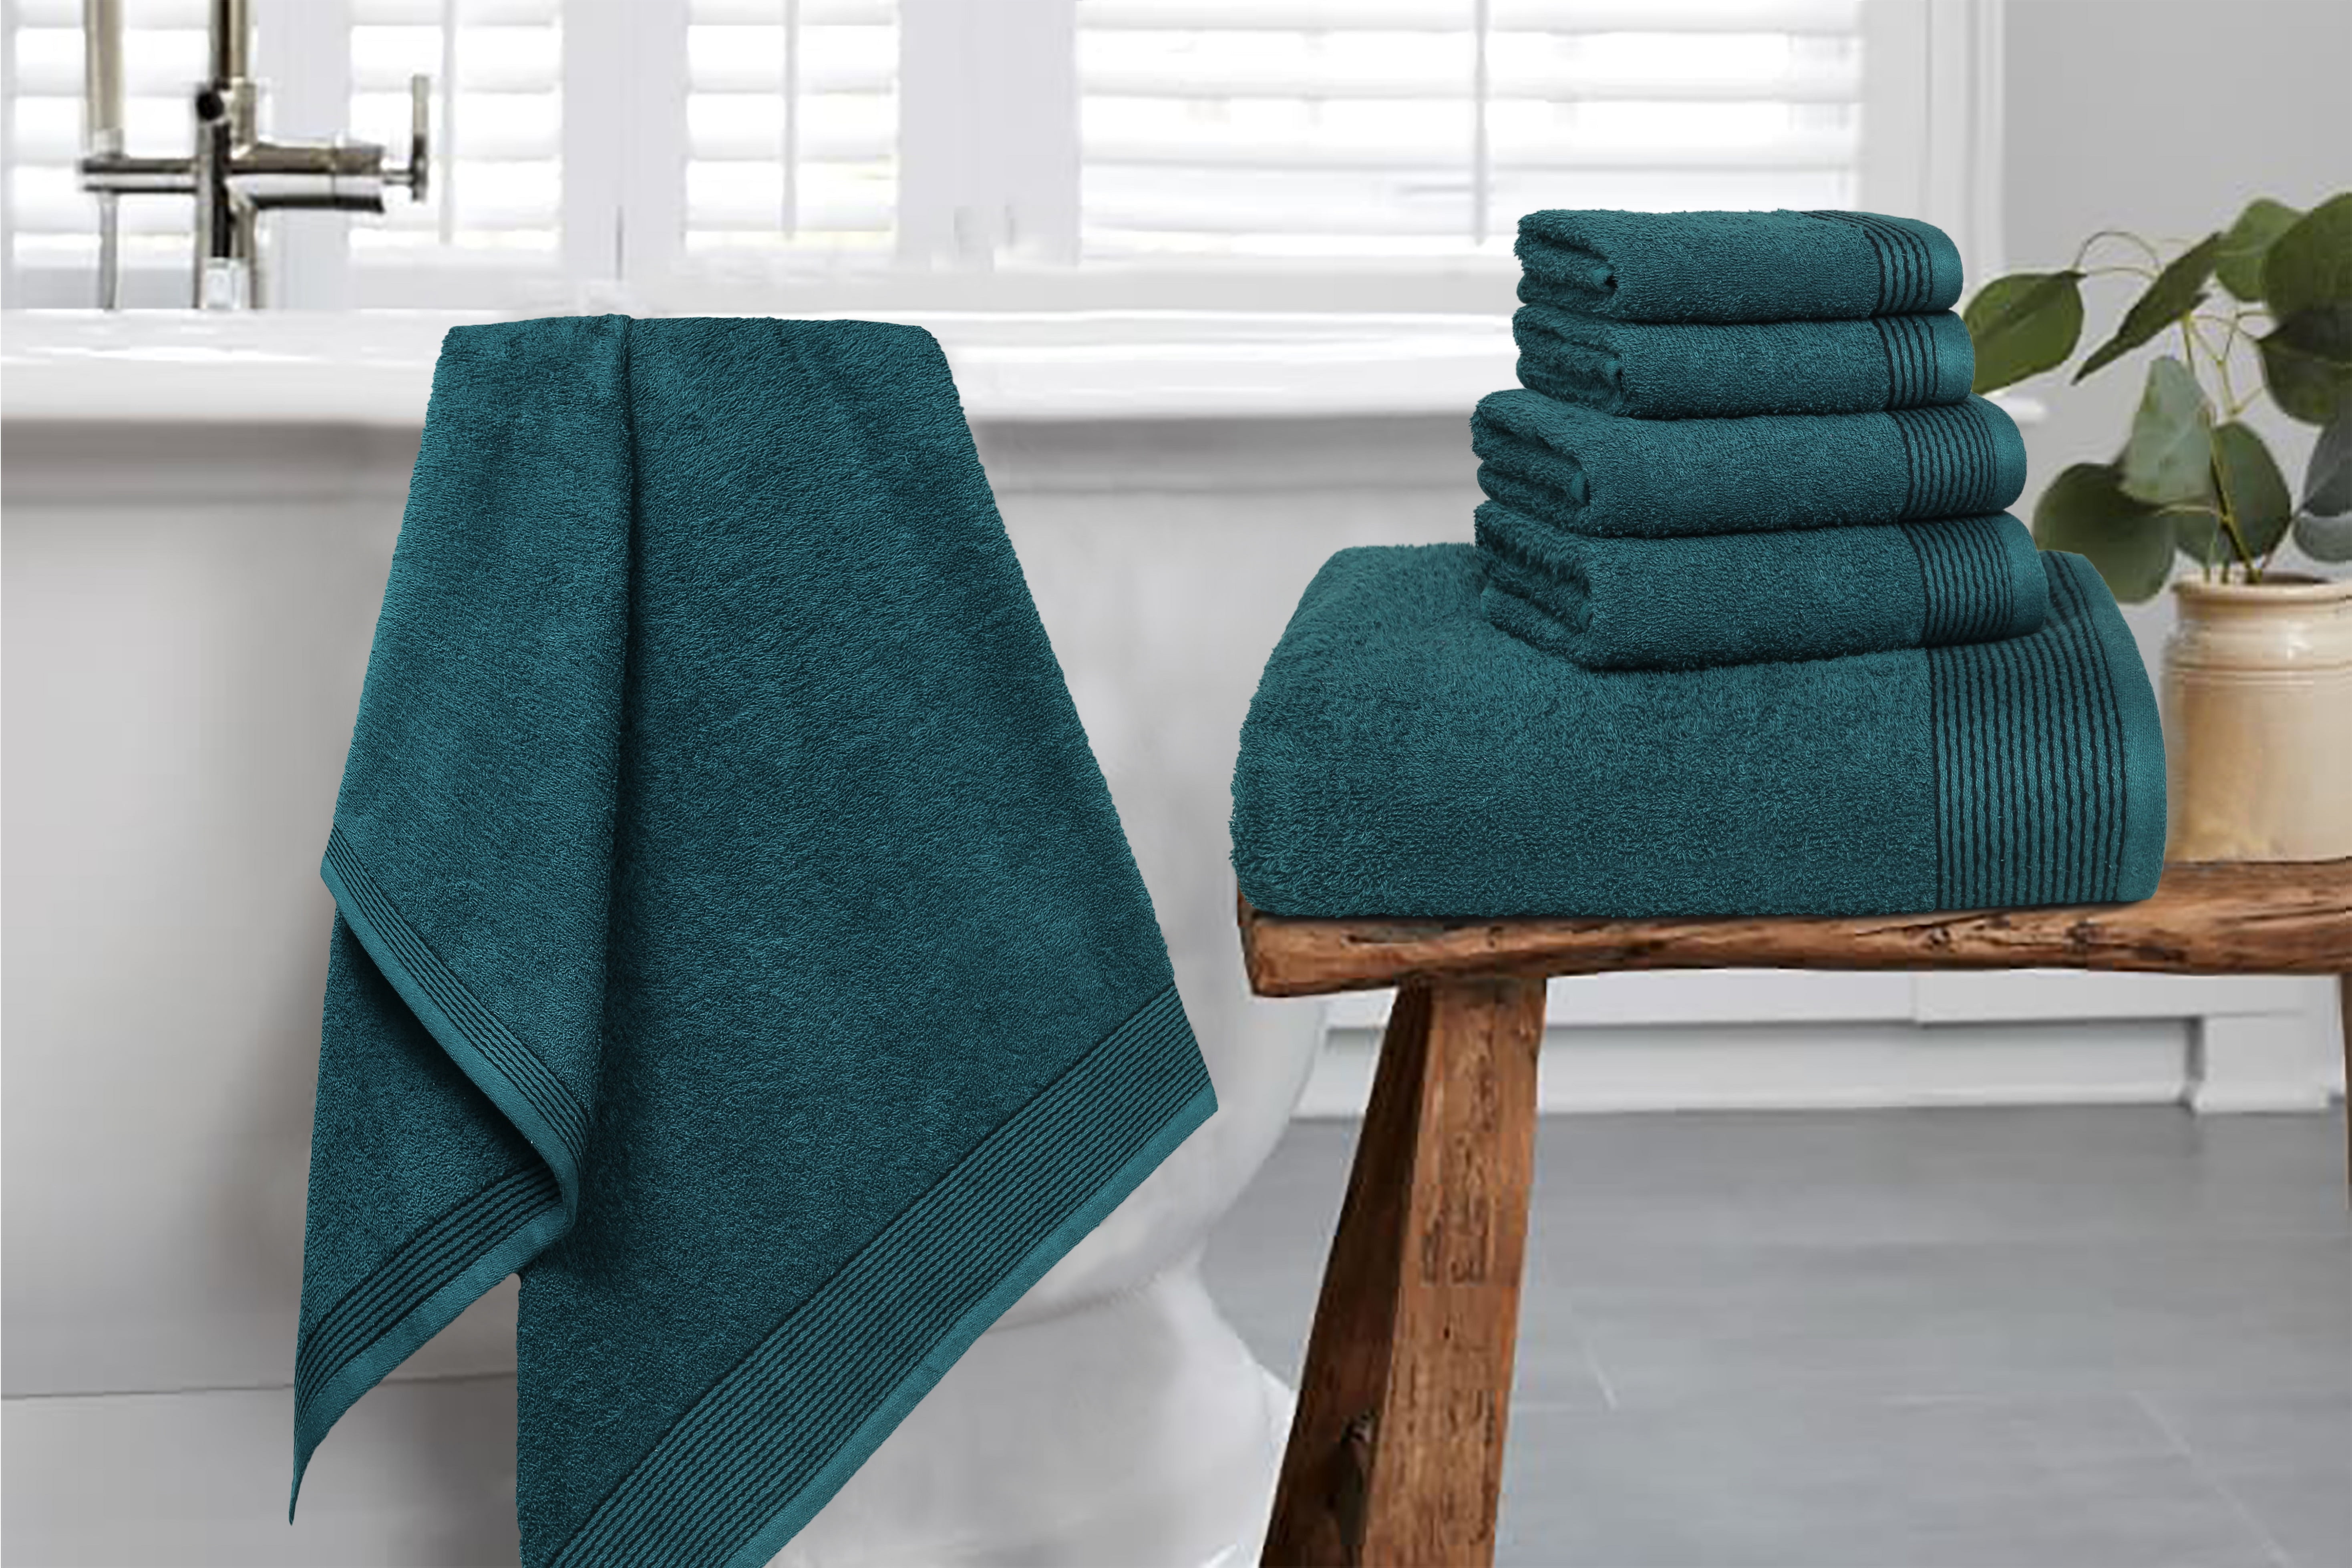 Elvana Home Ultra Soft 6 Pack Cotton Towel Set Contains 2 Bath Towels 28x55 inch 2 Hand Towels 16x24 inch & 2 Wash Coths 12x12 inch Ideal for Ever